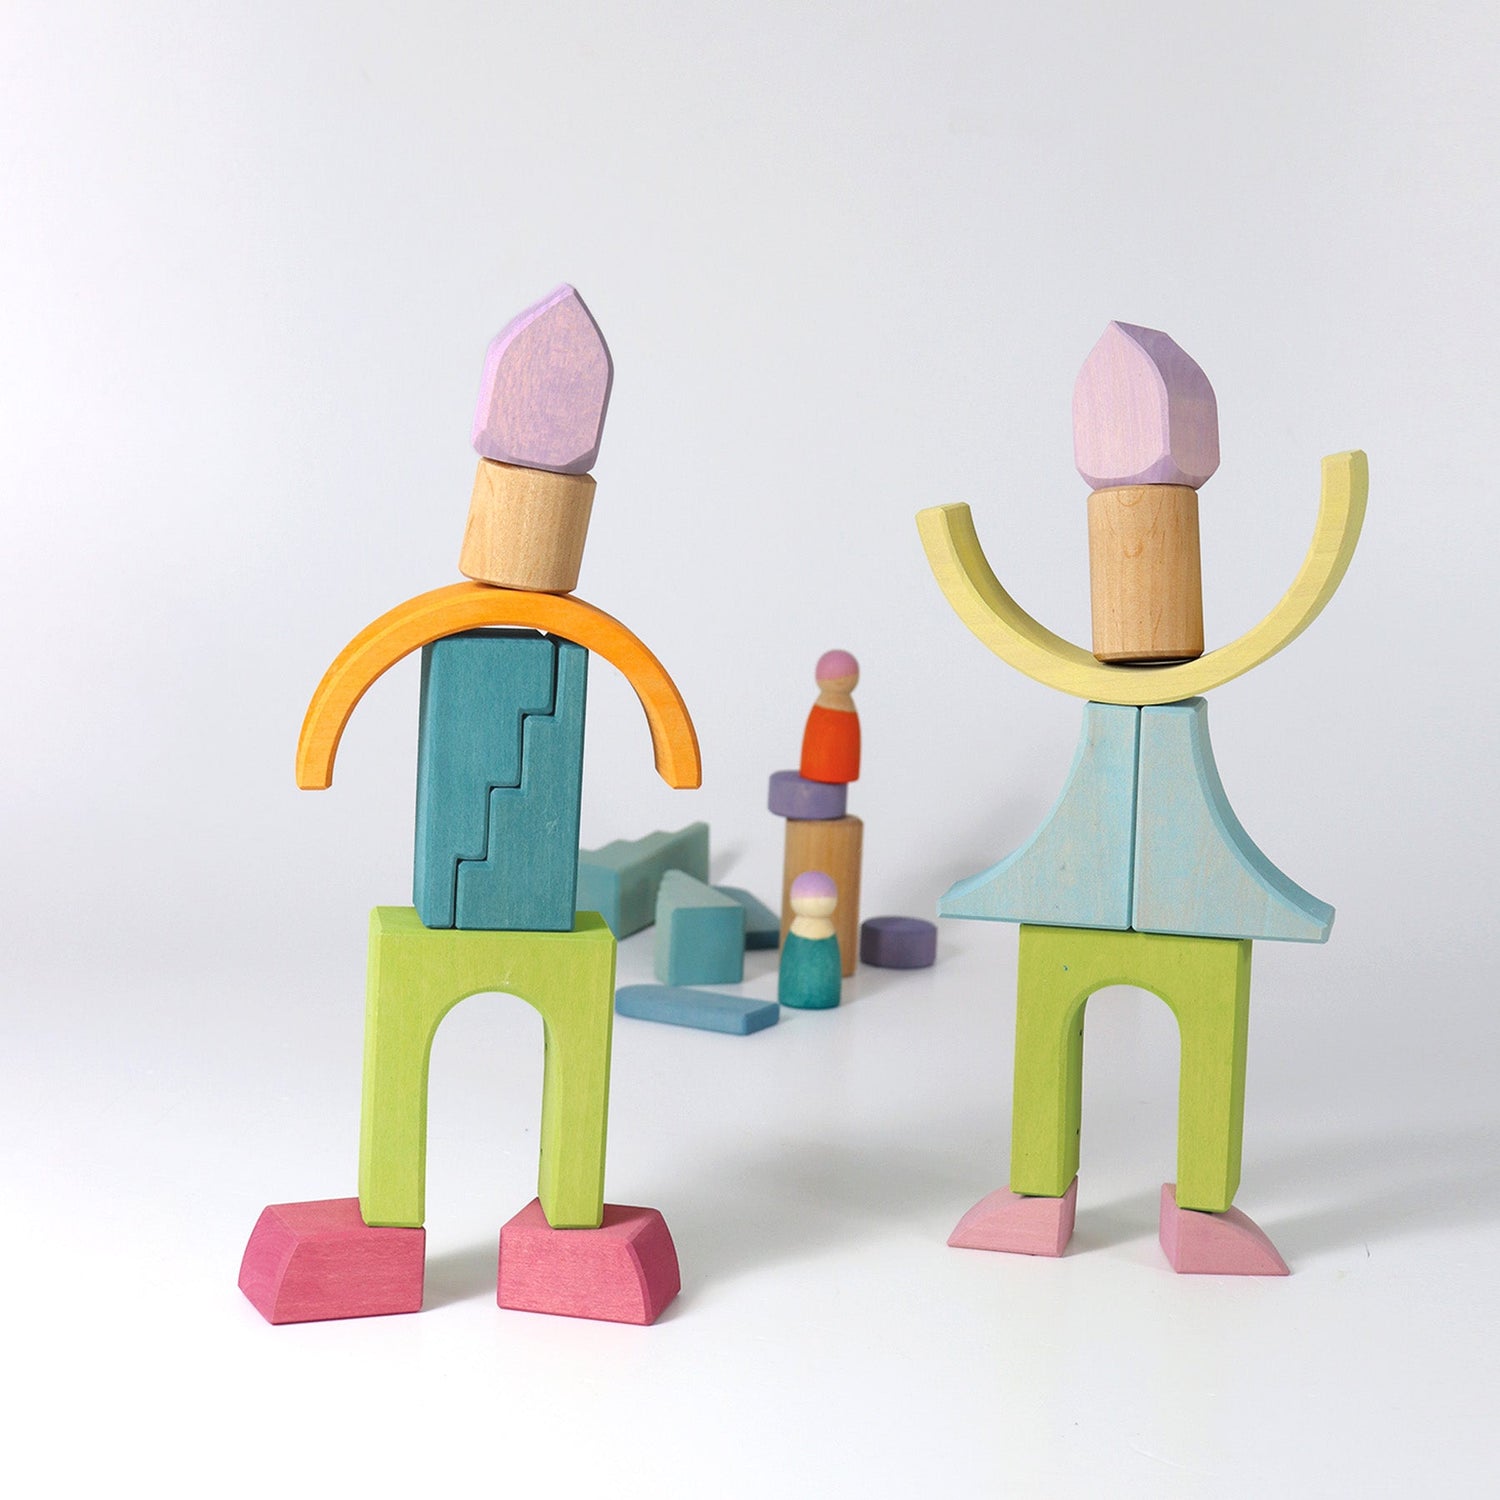 GRIMM'S | BUILDING WORLD CLOUD PLAY by GRIMM'S WOODEN TOYS - The Playful Collective